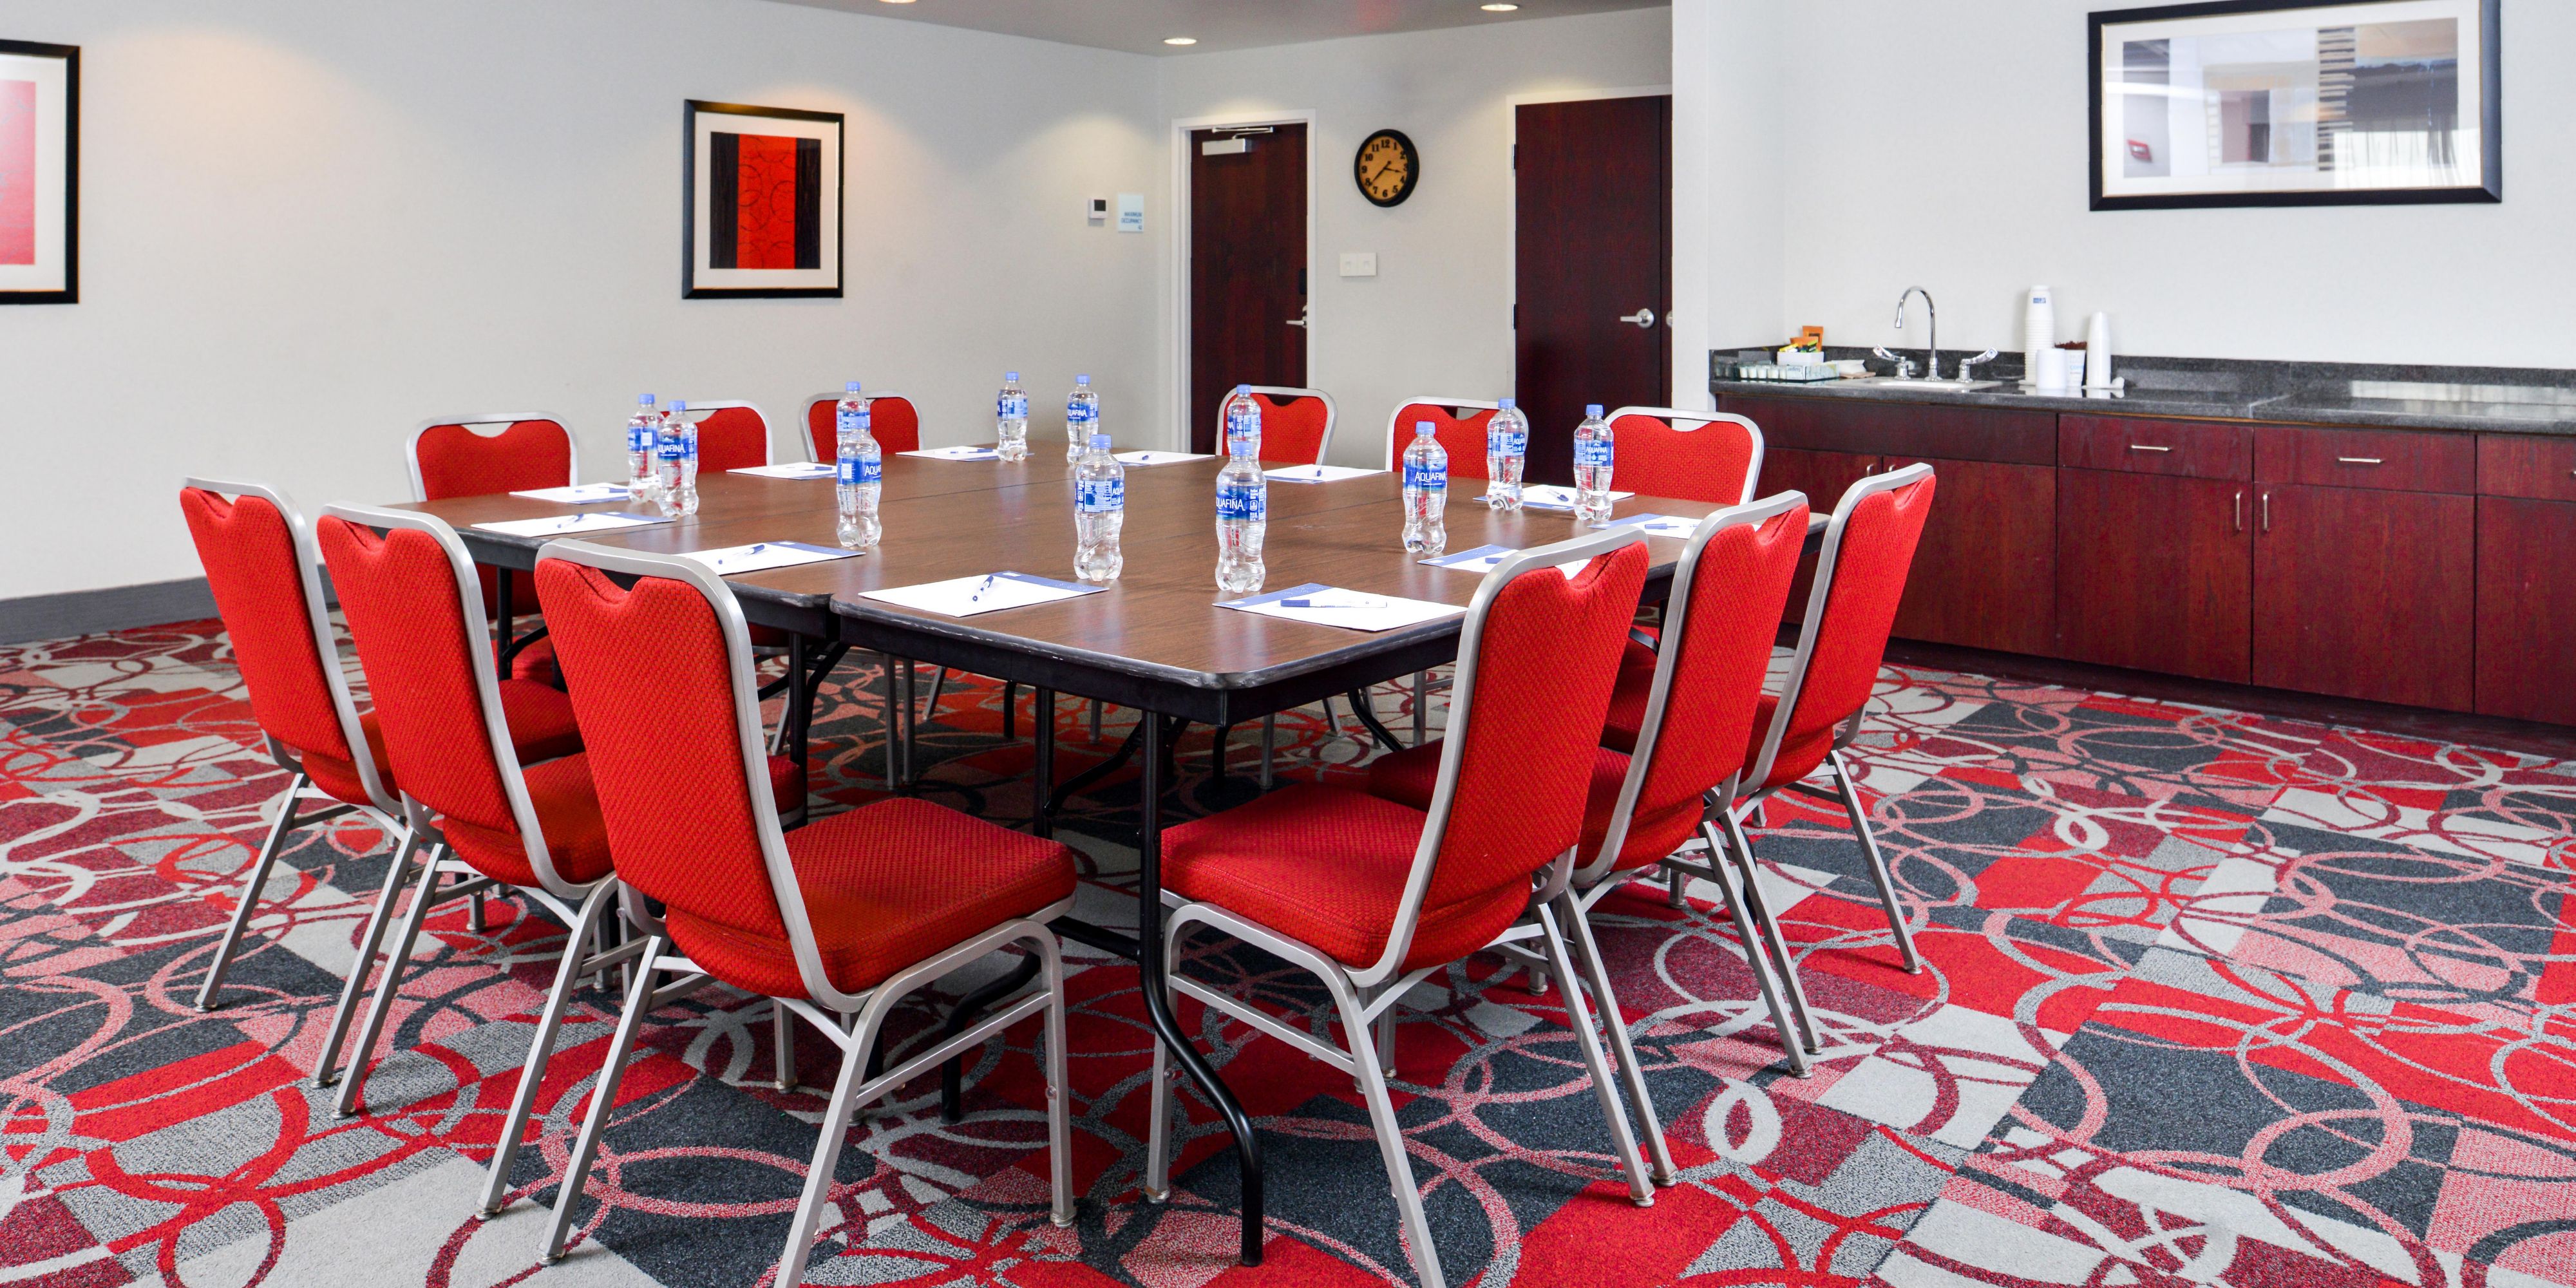 Join us for your next meeting in Canandaigua, NY. Our meeting space can safely entertain your group up to 20 people at this time. A/V, complementary WIFI, and a wet bar area are some of the amenities we offer. Please call us today to book!